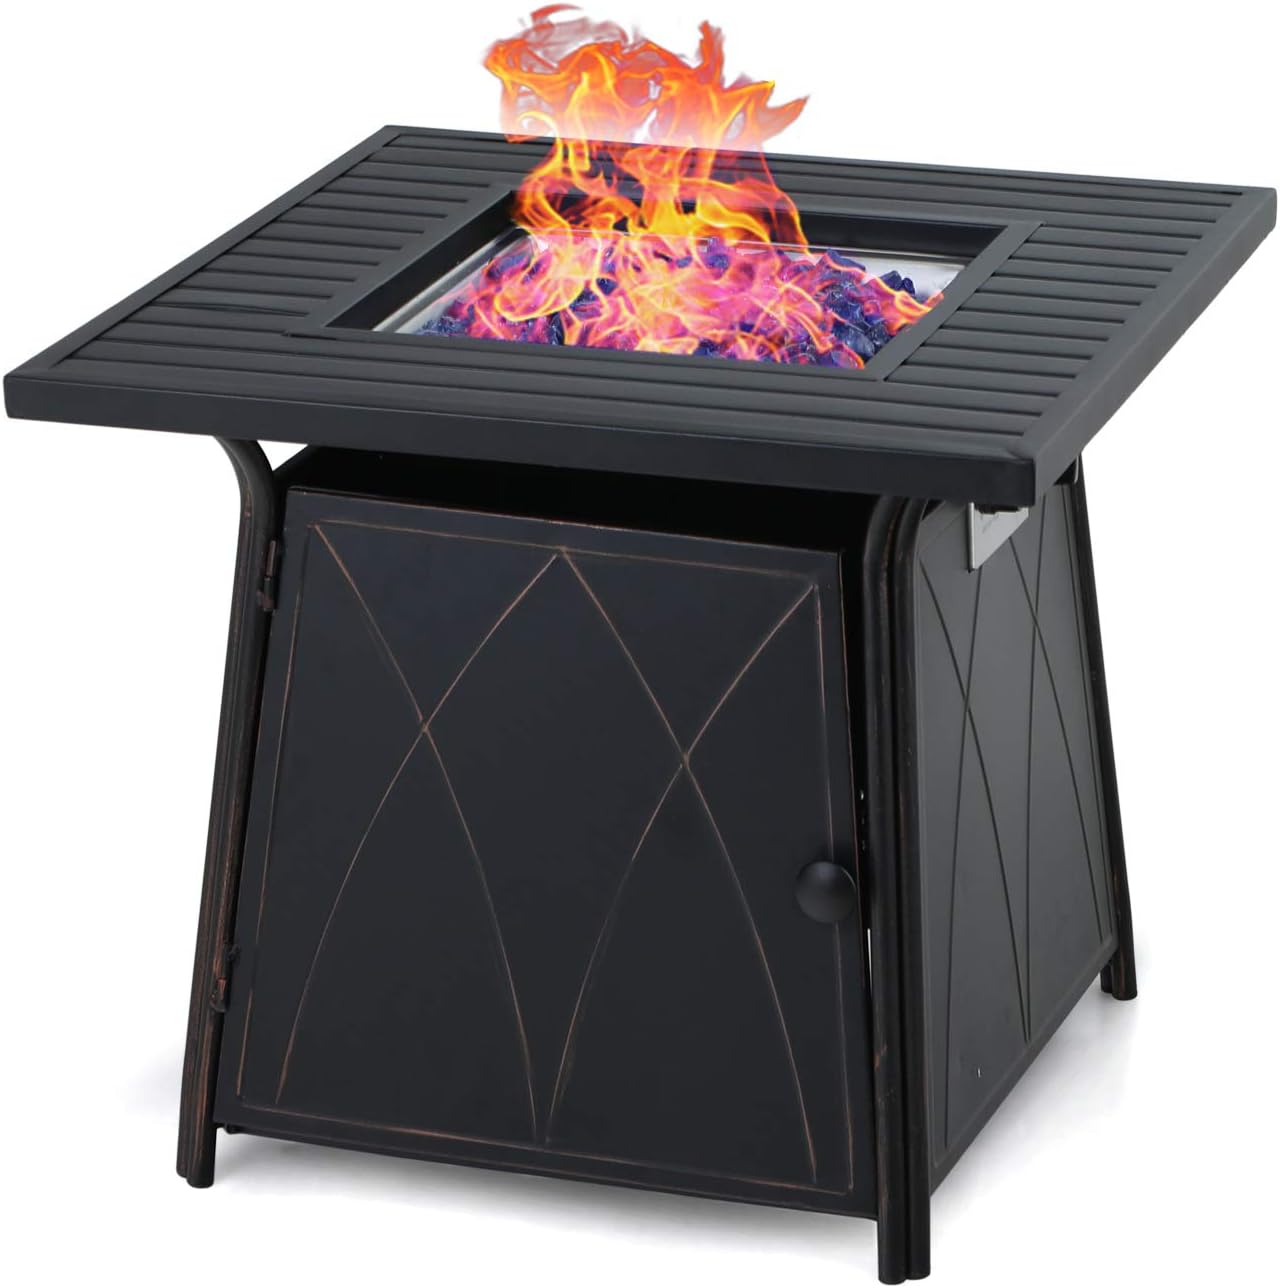 MFSTUDIO 28 Inch Gas Fire Pit Table,50000 BTU Propane Steel Striped Square Handpainting Treatment Fire Table with Lid and Blue Glass for Patio,Backyard and Balcony,Black